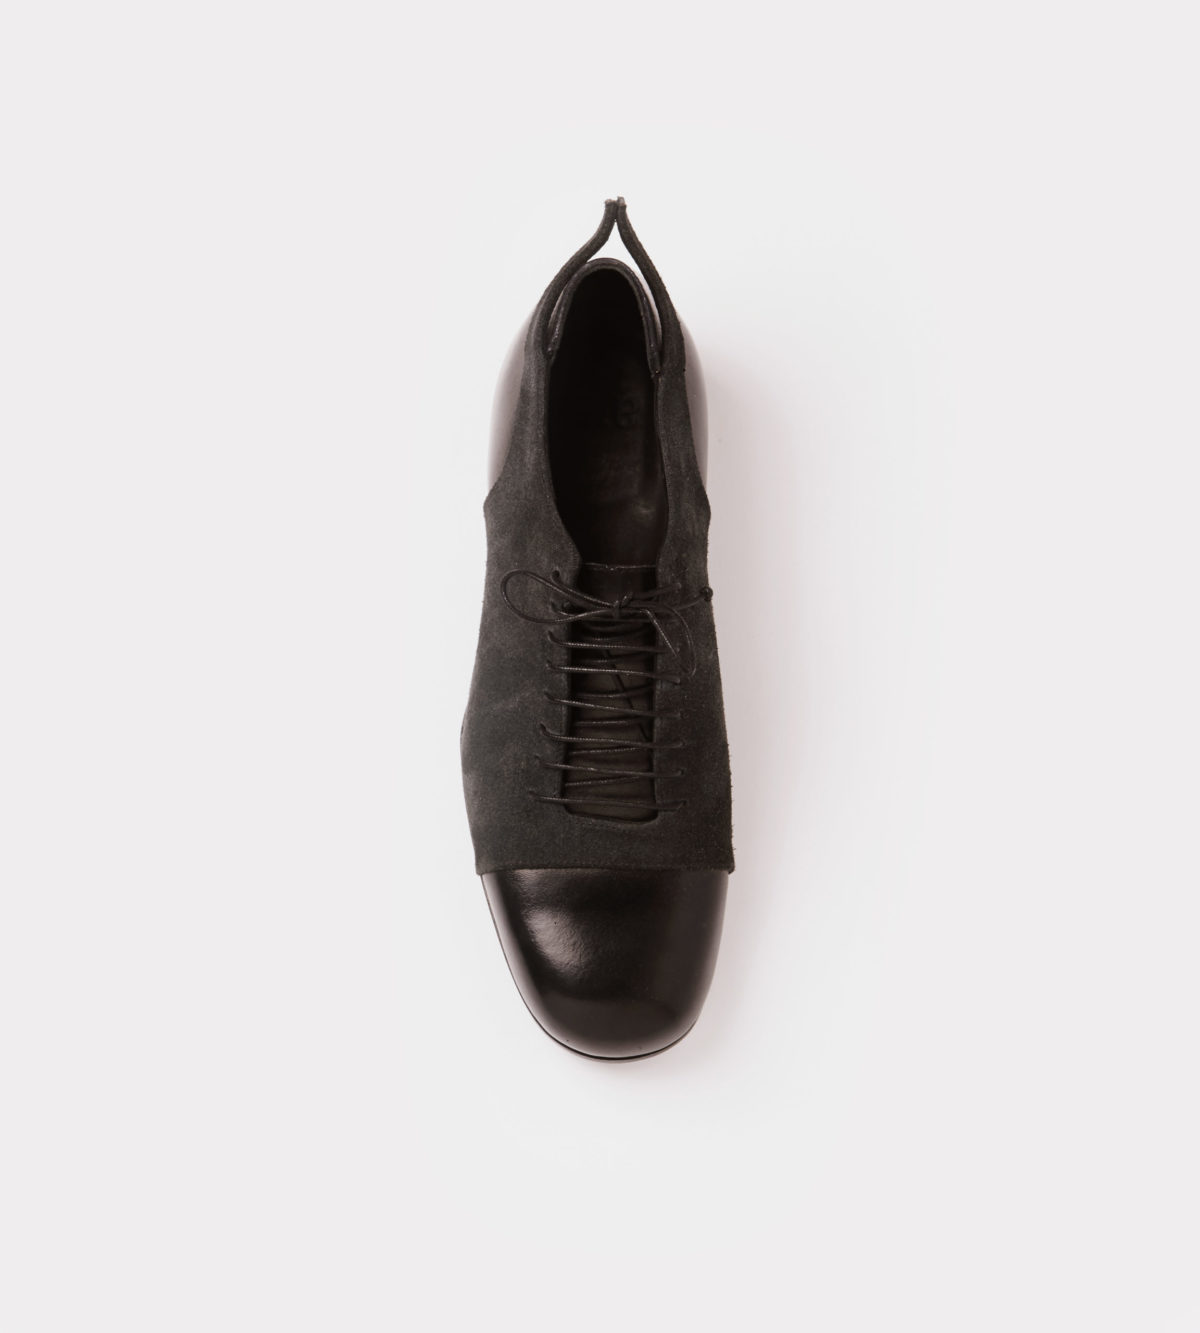 Handmade black leather-suede lace up shoe - front view